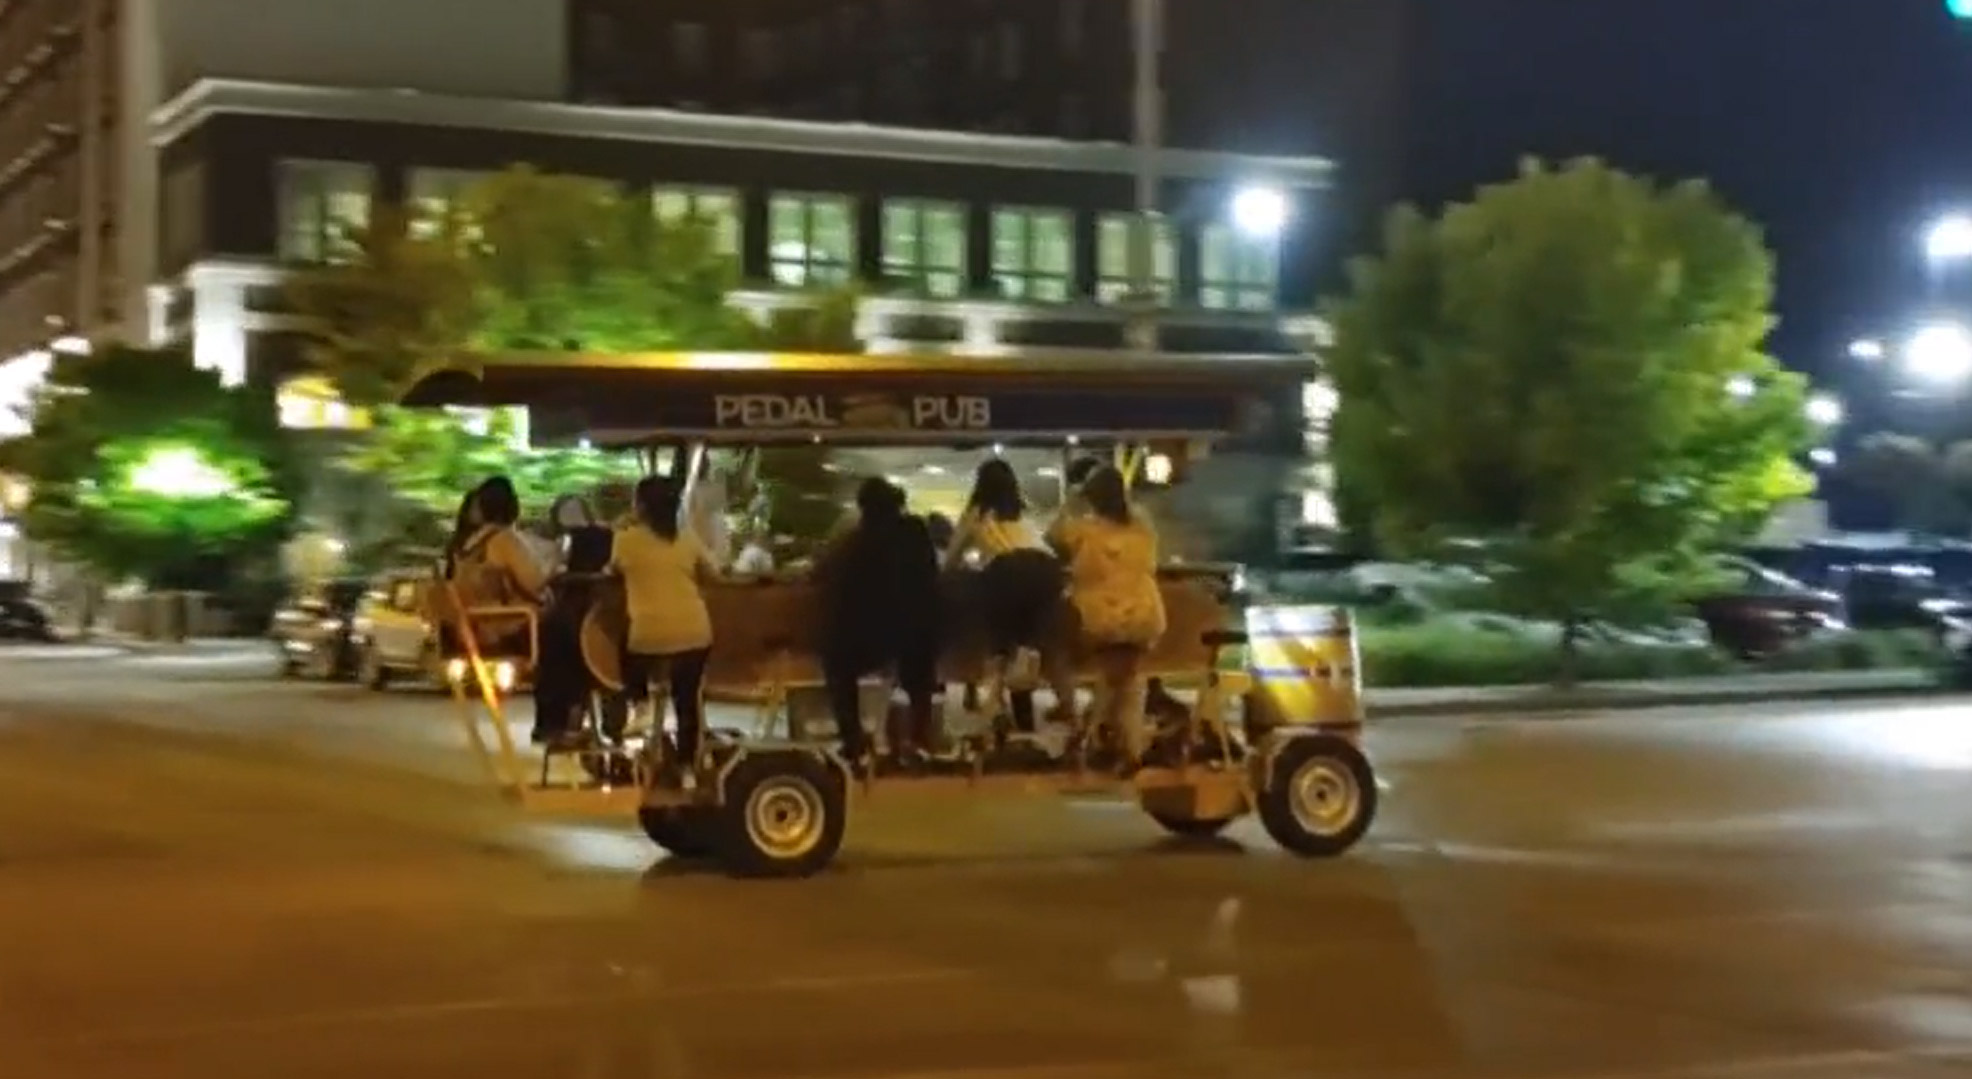 Out & About | Pedal Pub of the Quad Cities